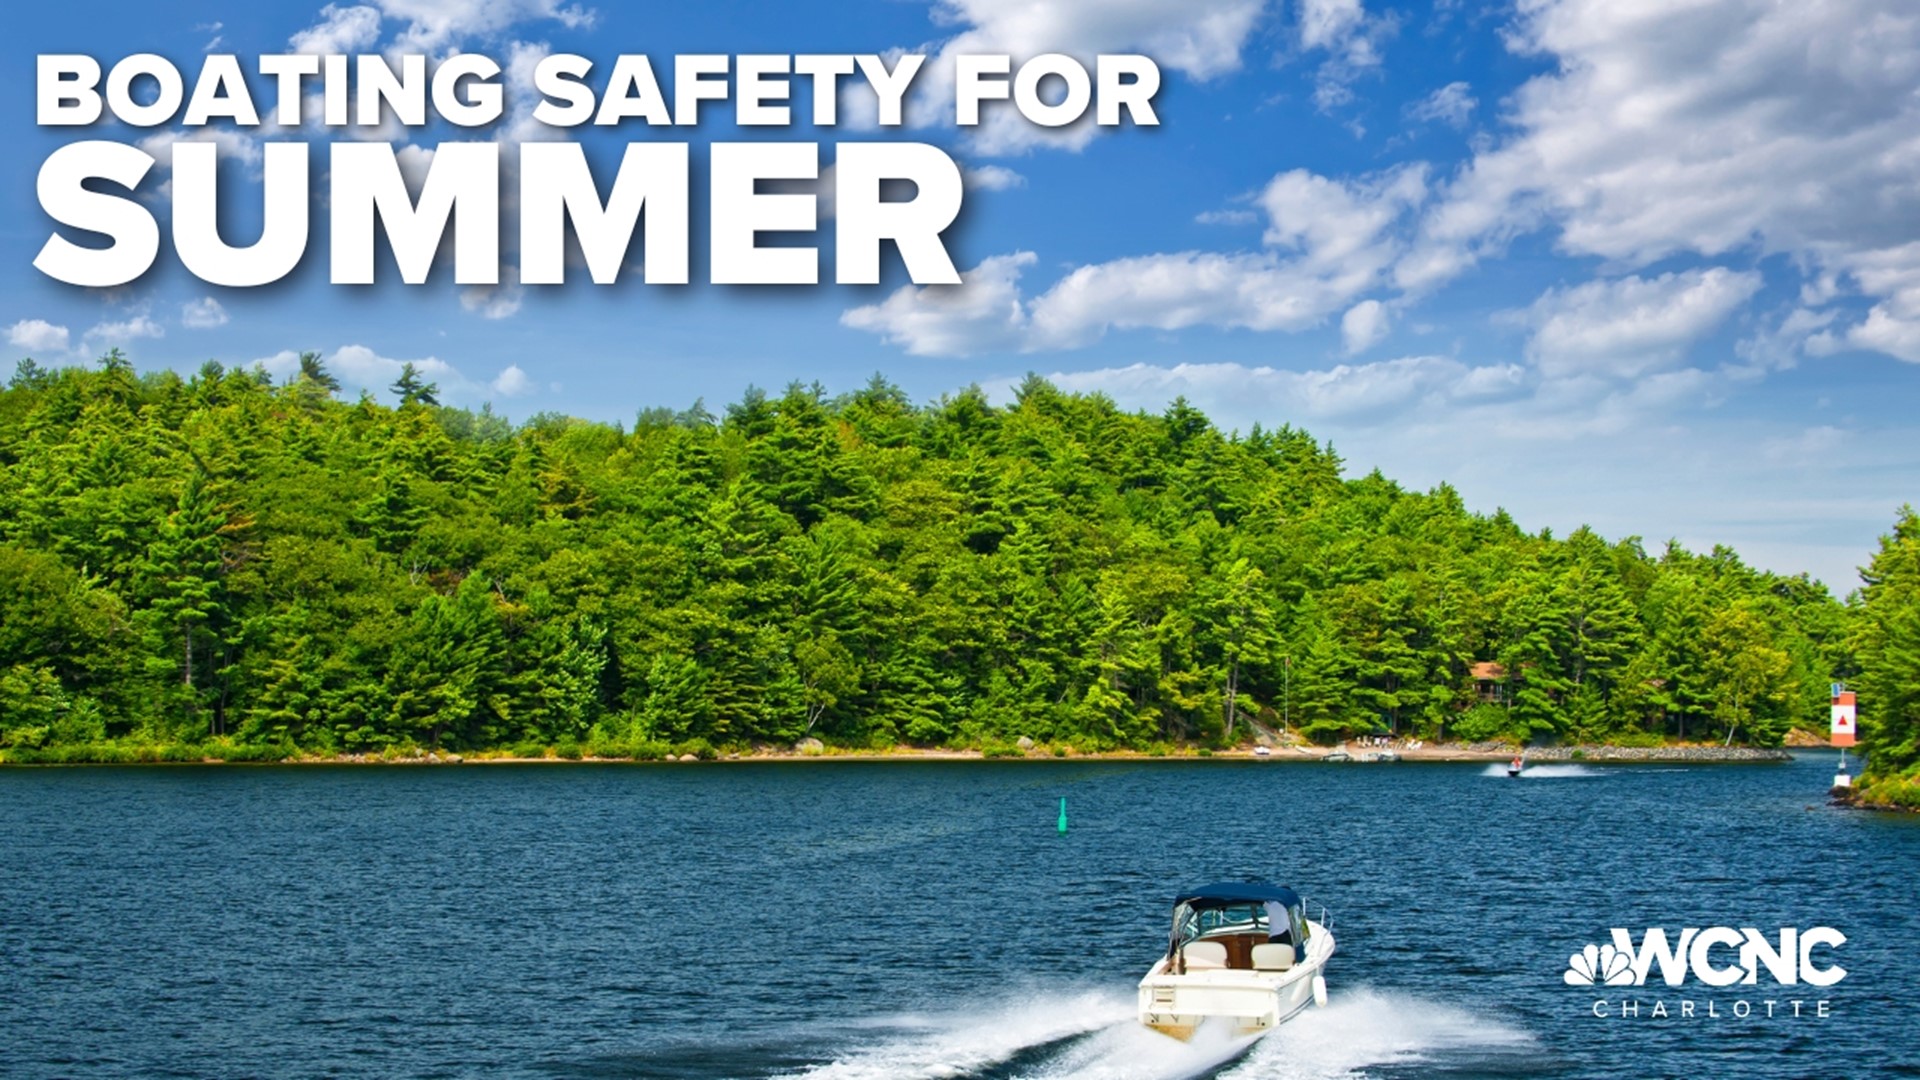 Jesse Pierre digs into key tips for boating safety this summer.